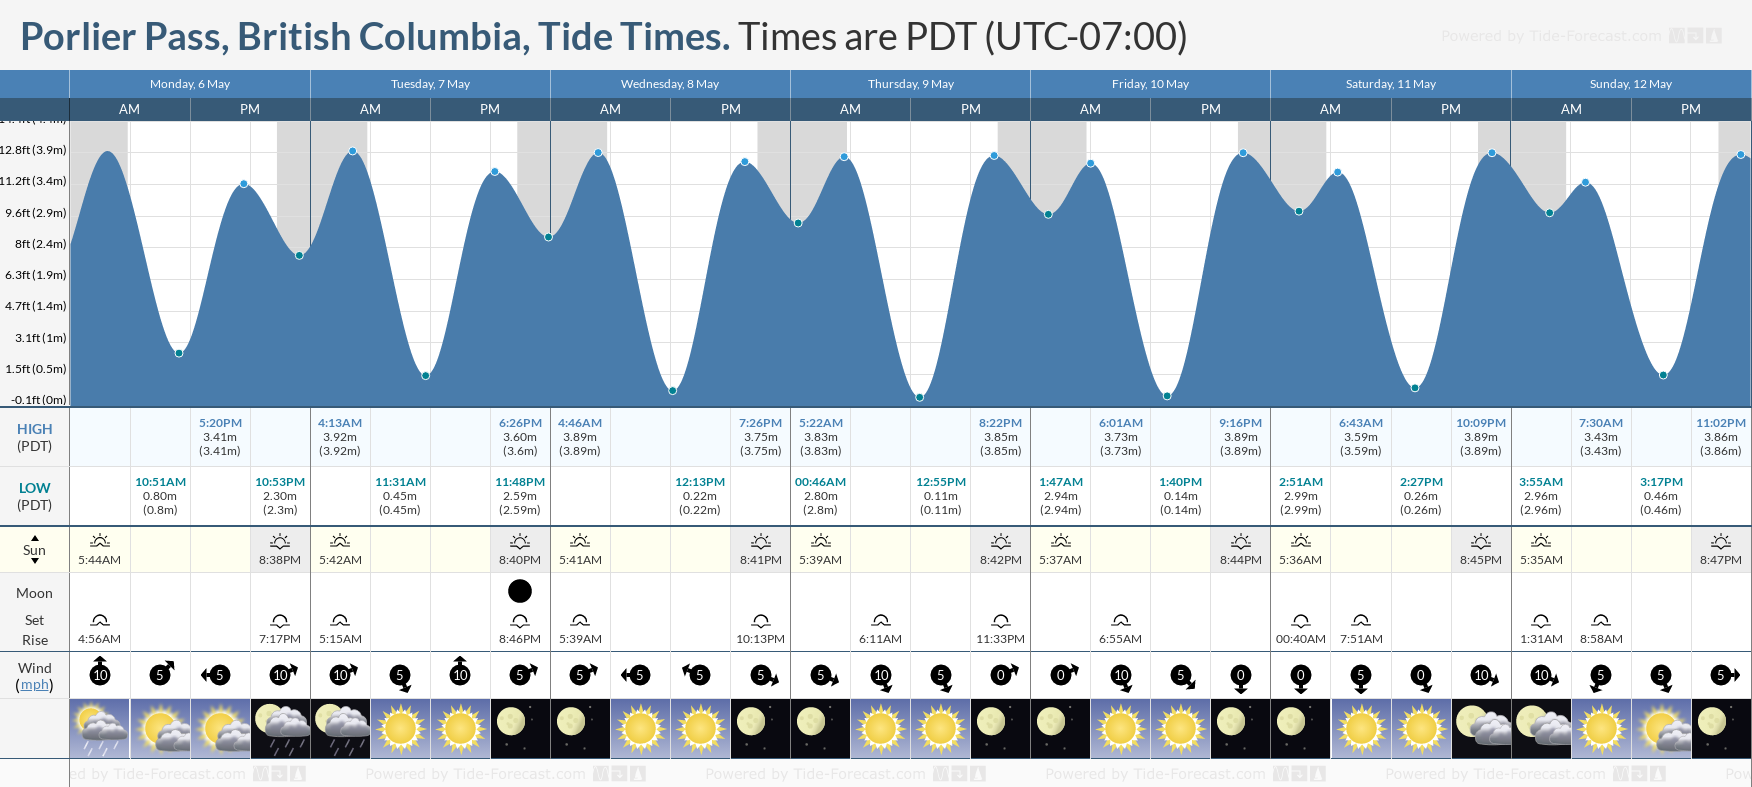 Porlier Pass, British Columbia Tide Chart including high and low tide tide times for the next 7 days